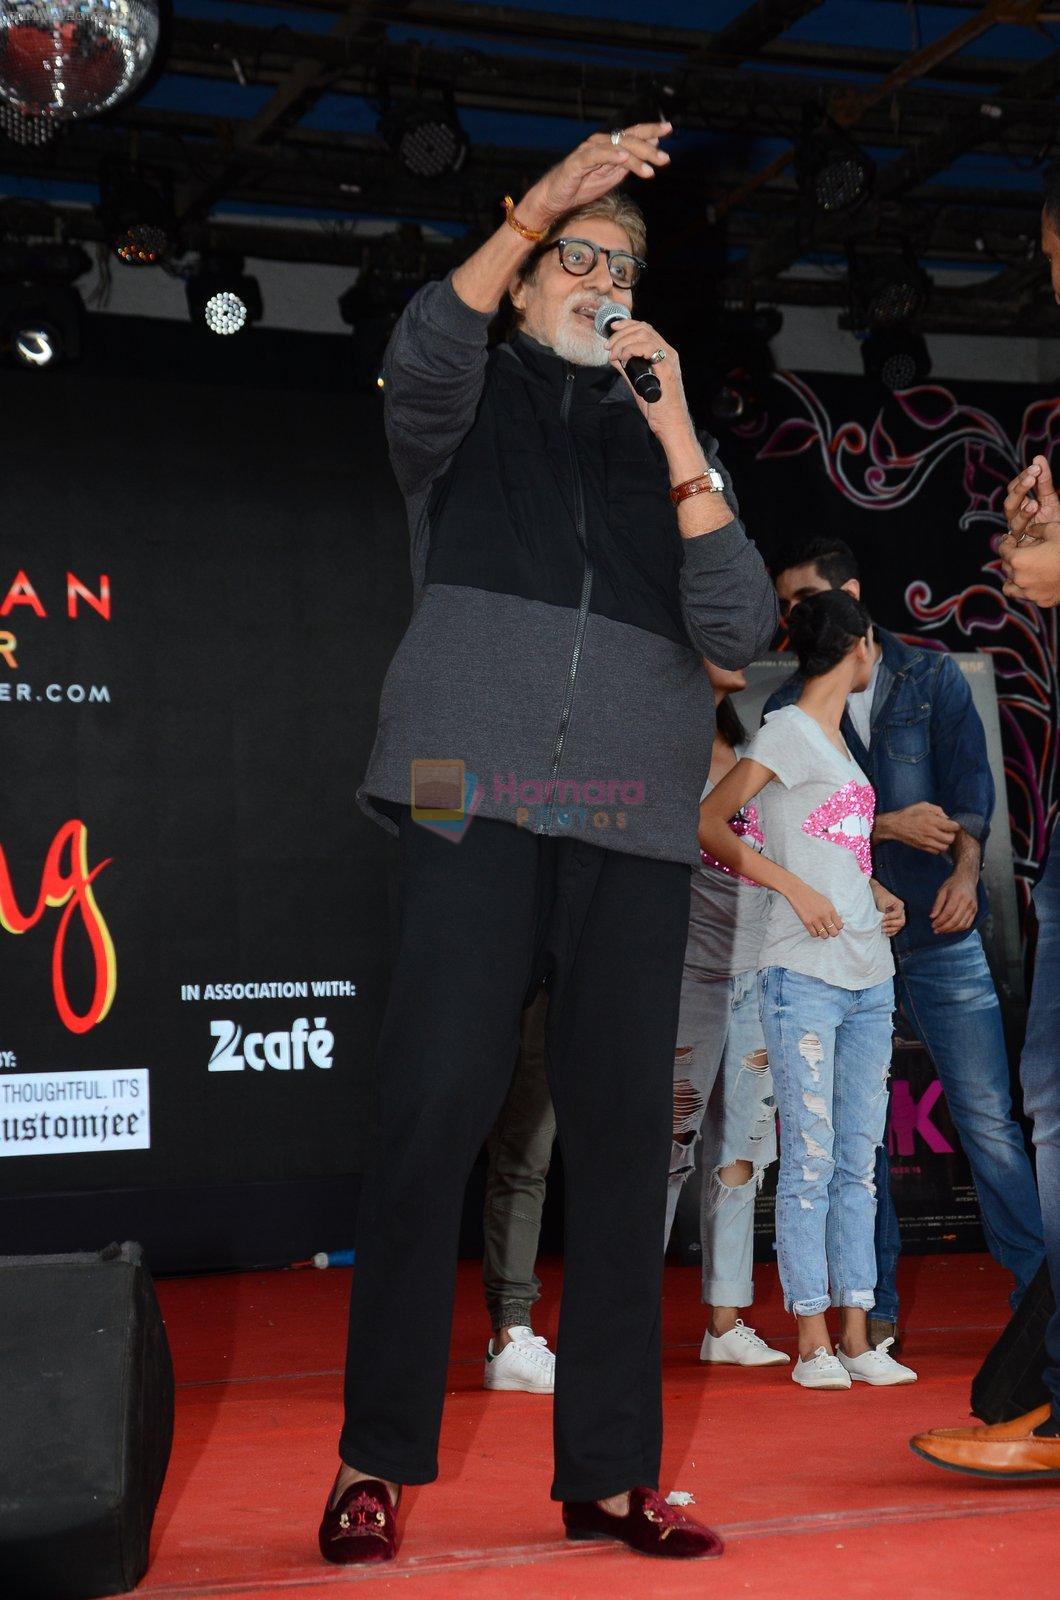 Amitabh Bachchan at Pink promotions in Umang fest on 17th Aug 2016